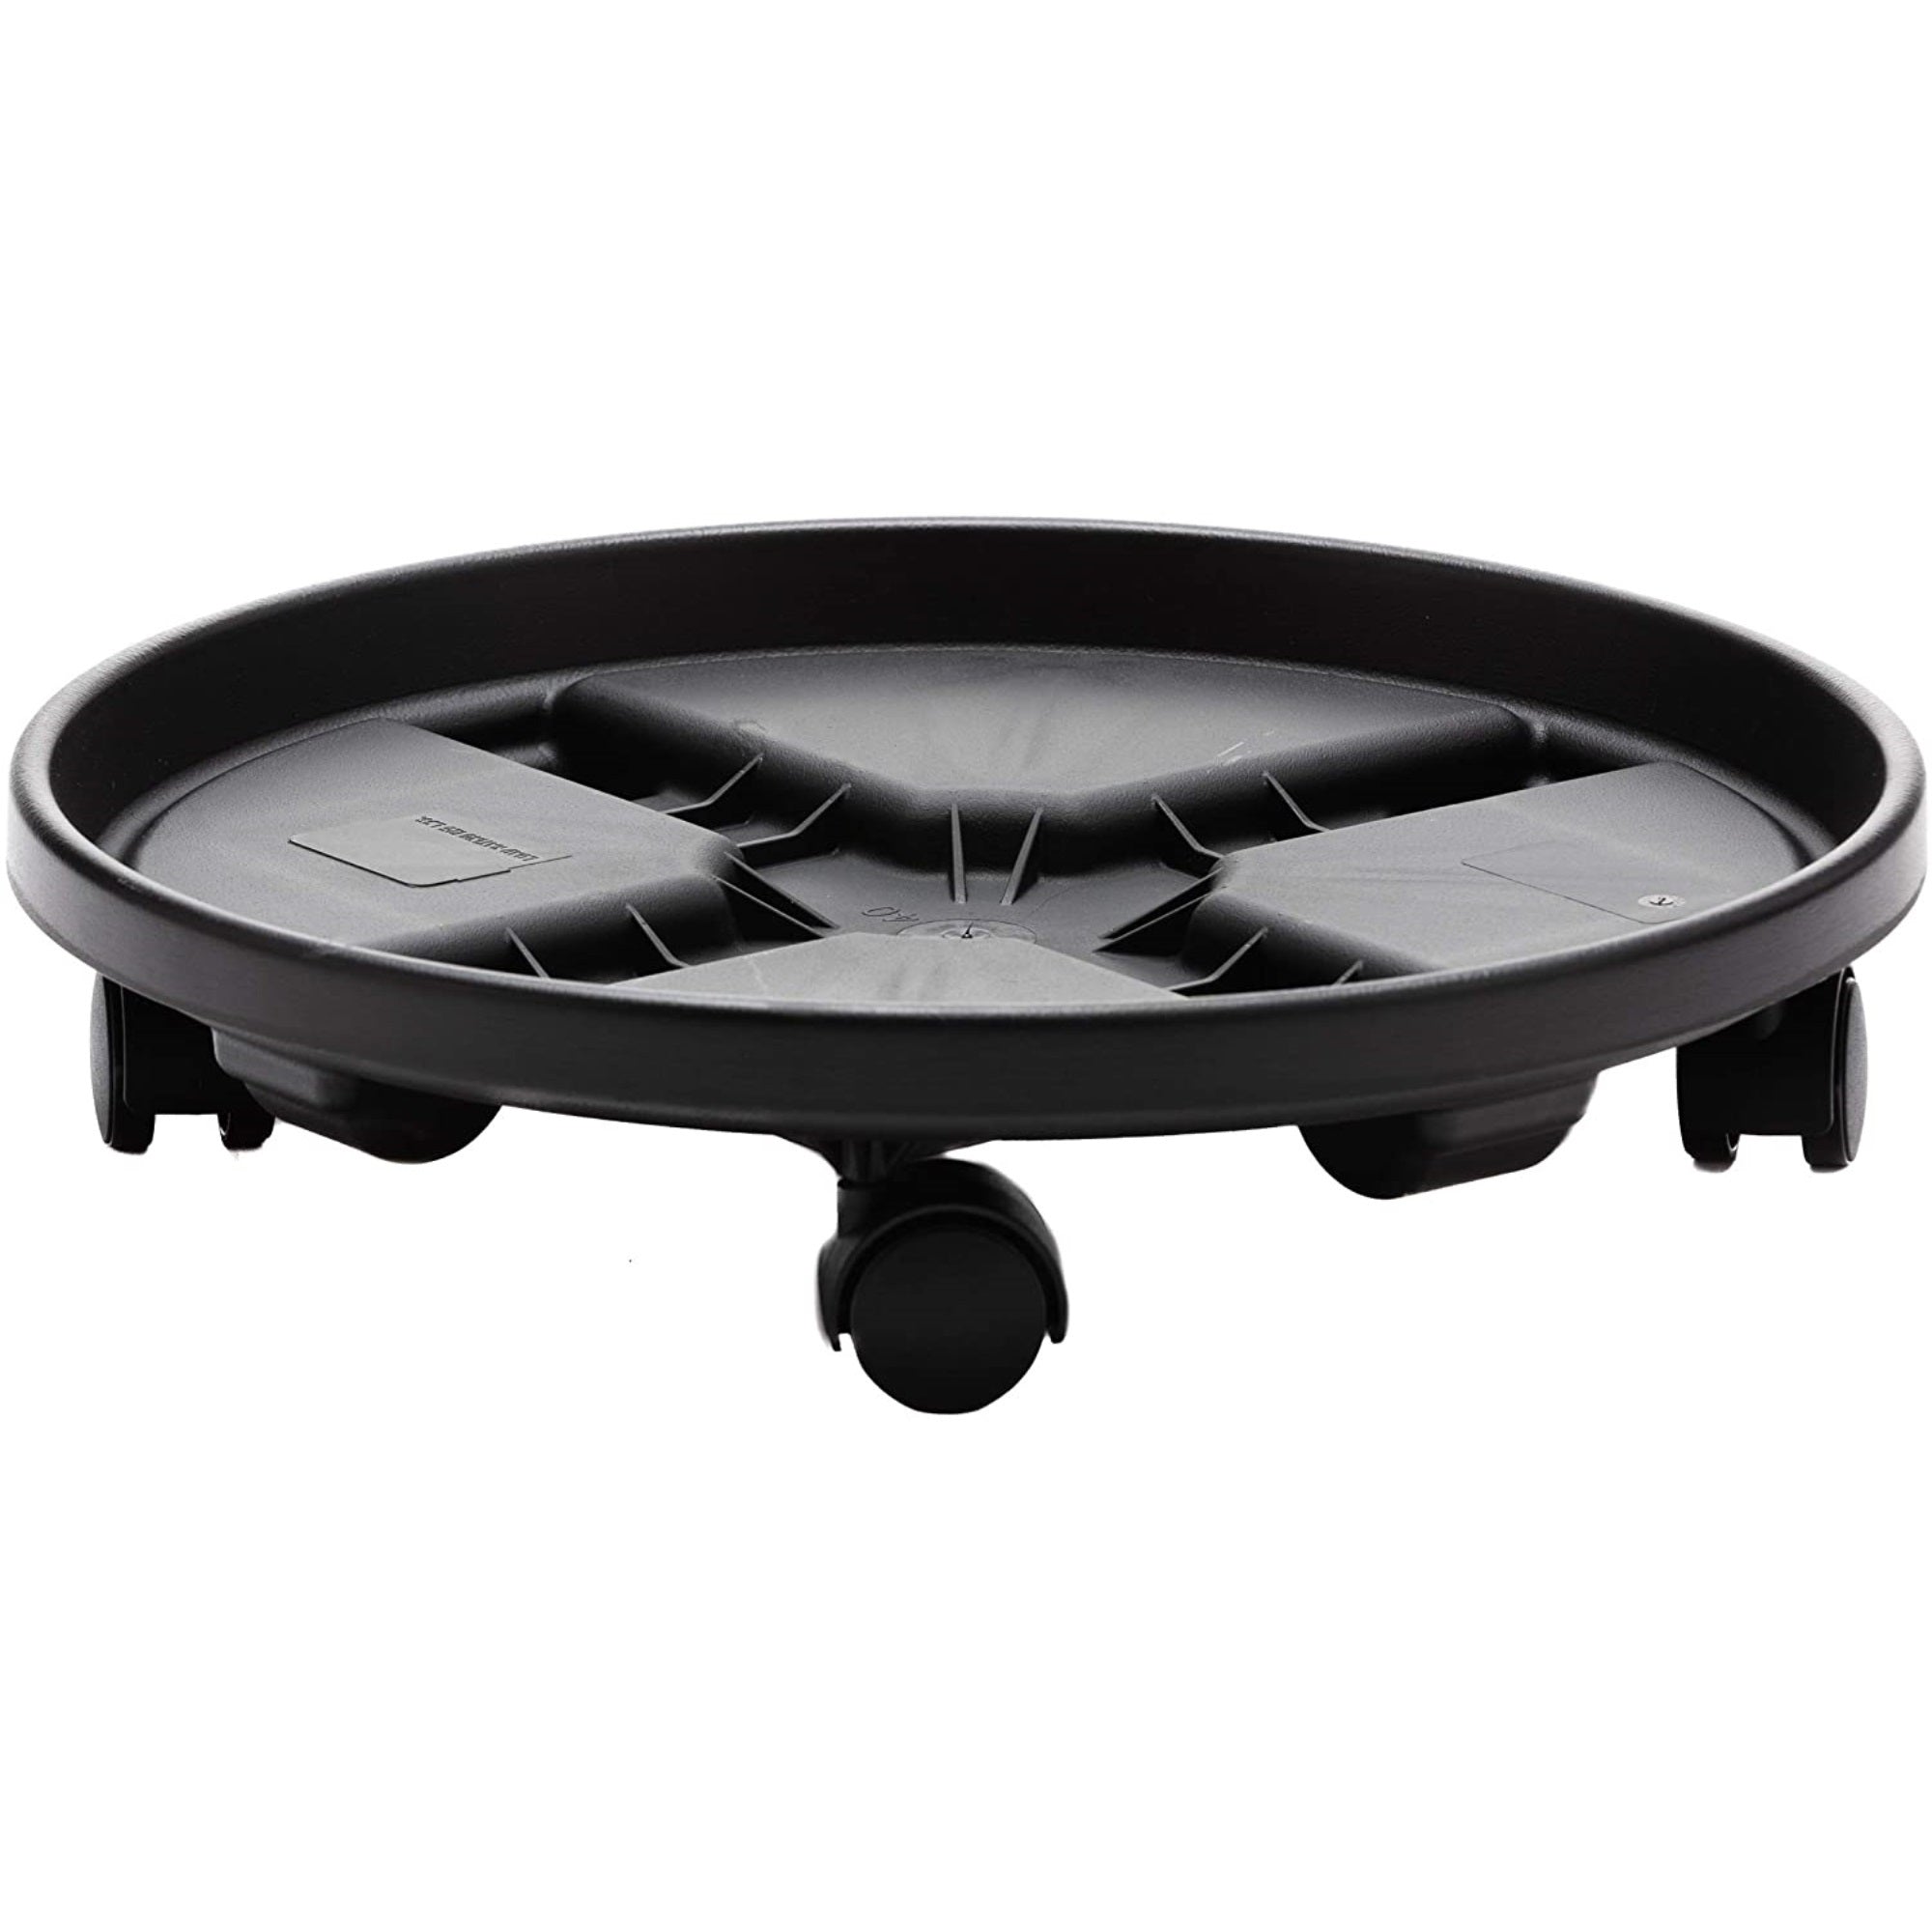 Bloem Plant Caddy with Saucer Tray and Wheels, Round, Black 16"